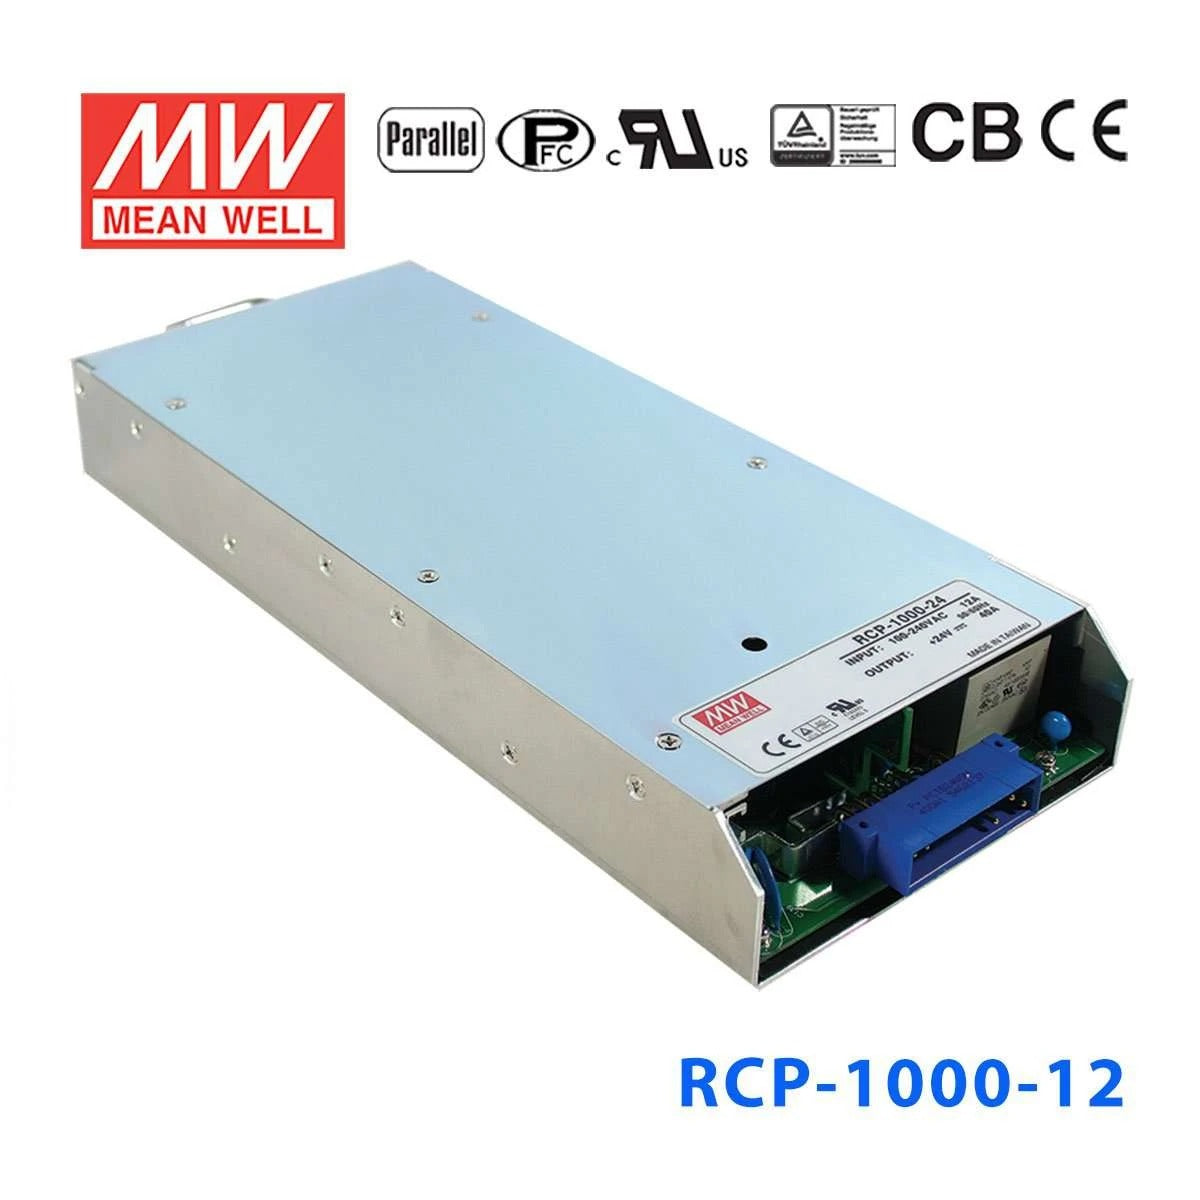 Mean Well RCP-1600-12 power supply 1600W 12V 125A